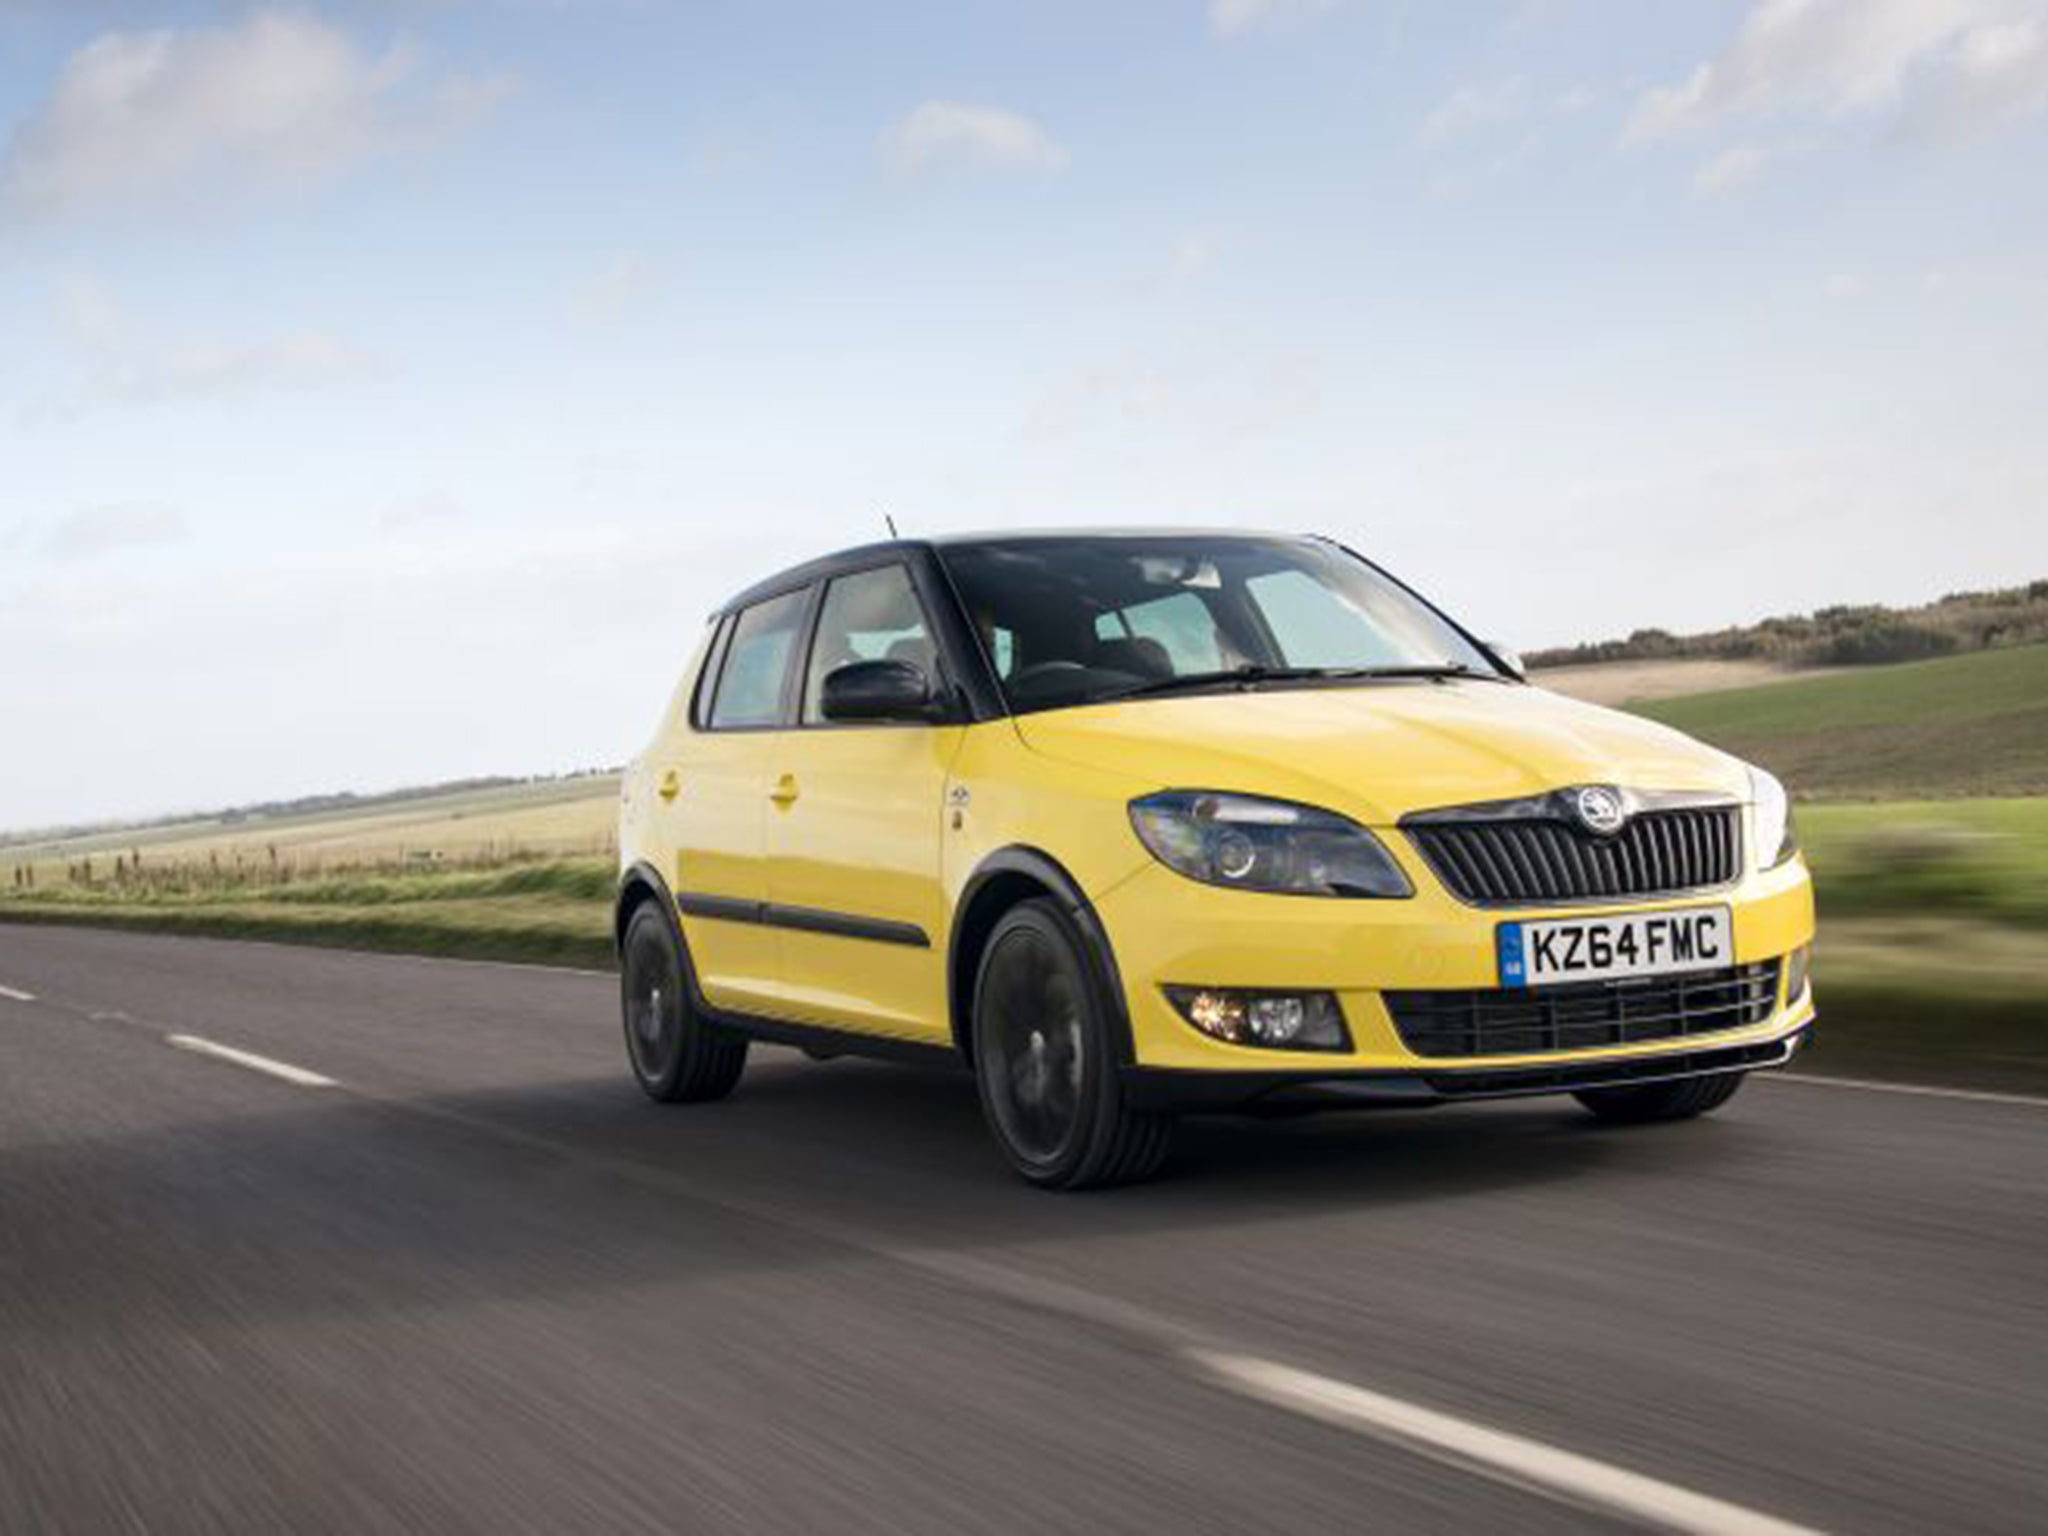 The Skoda Fabia has a top speed of 113mph